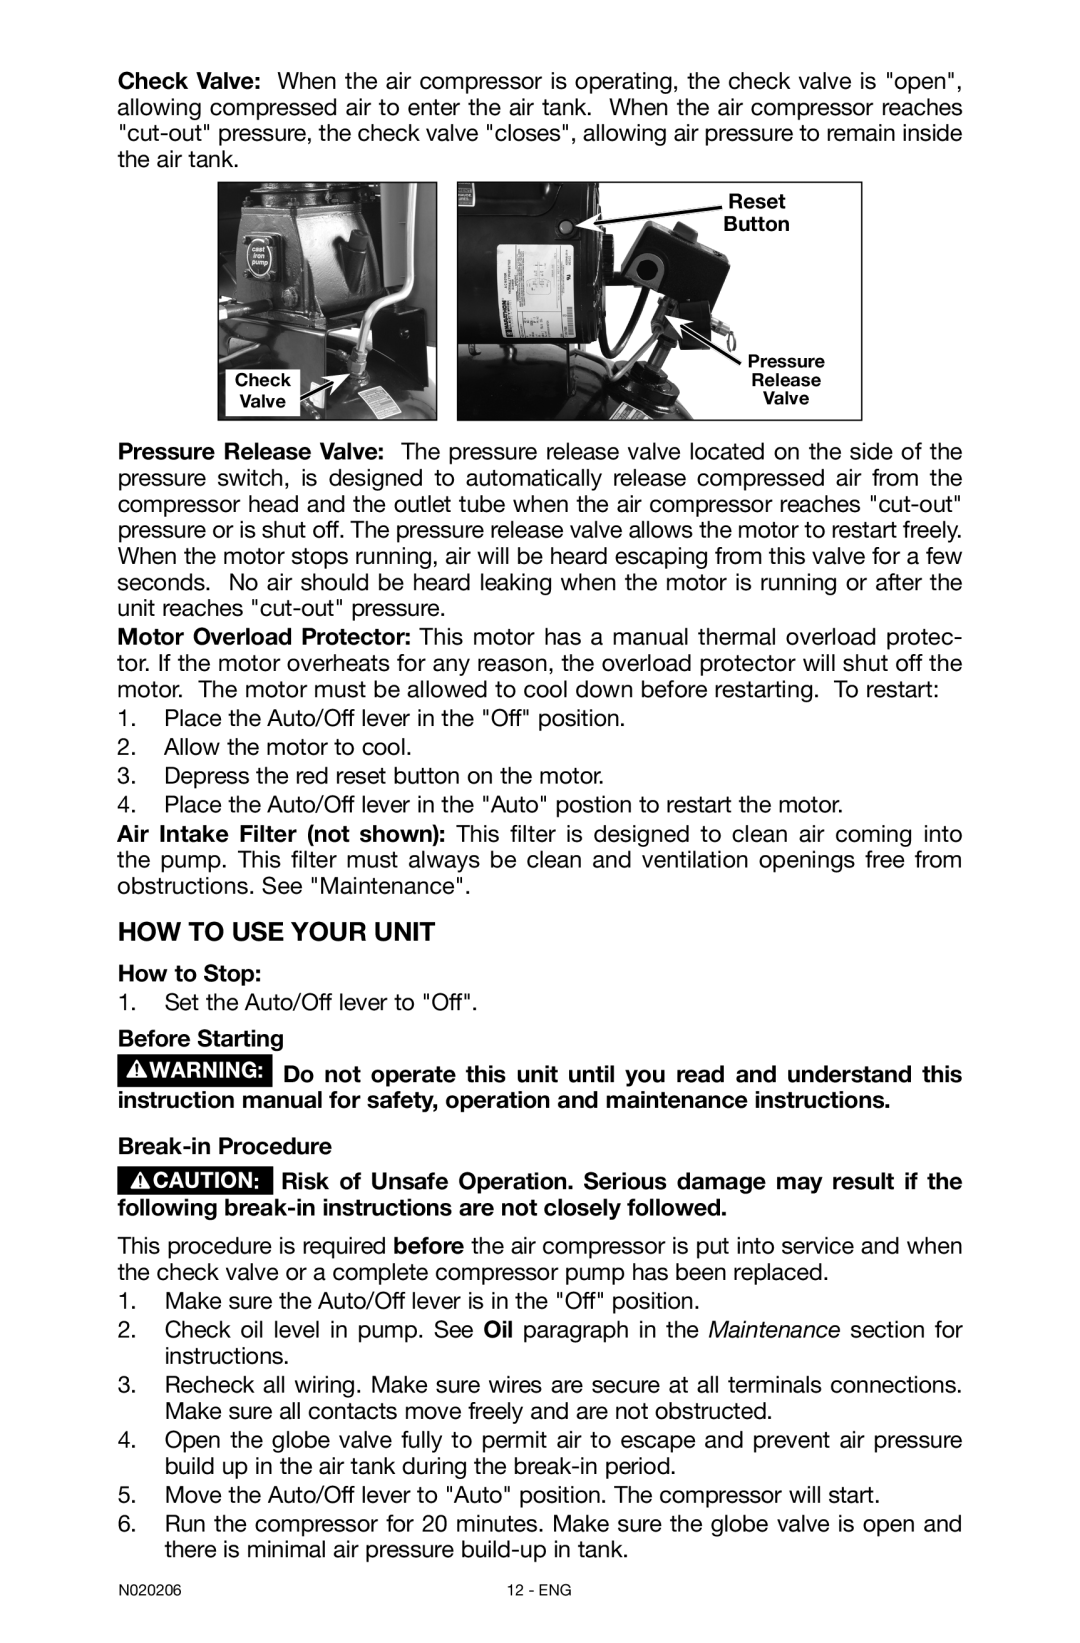 Porter-Cable N020206-NOV08-0, C7501M How to Use Your Unit, How to Stop, Before Starting, Break-in Procedure 